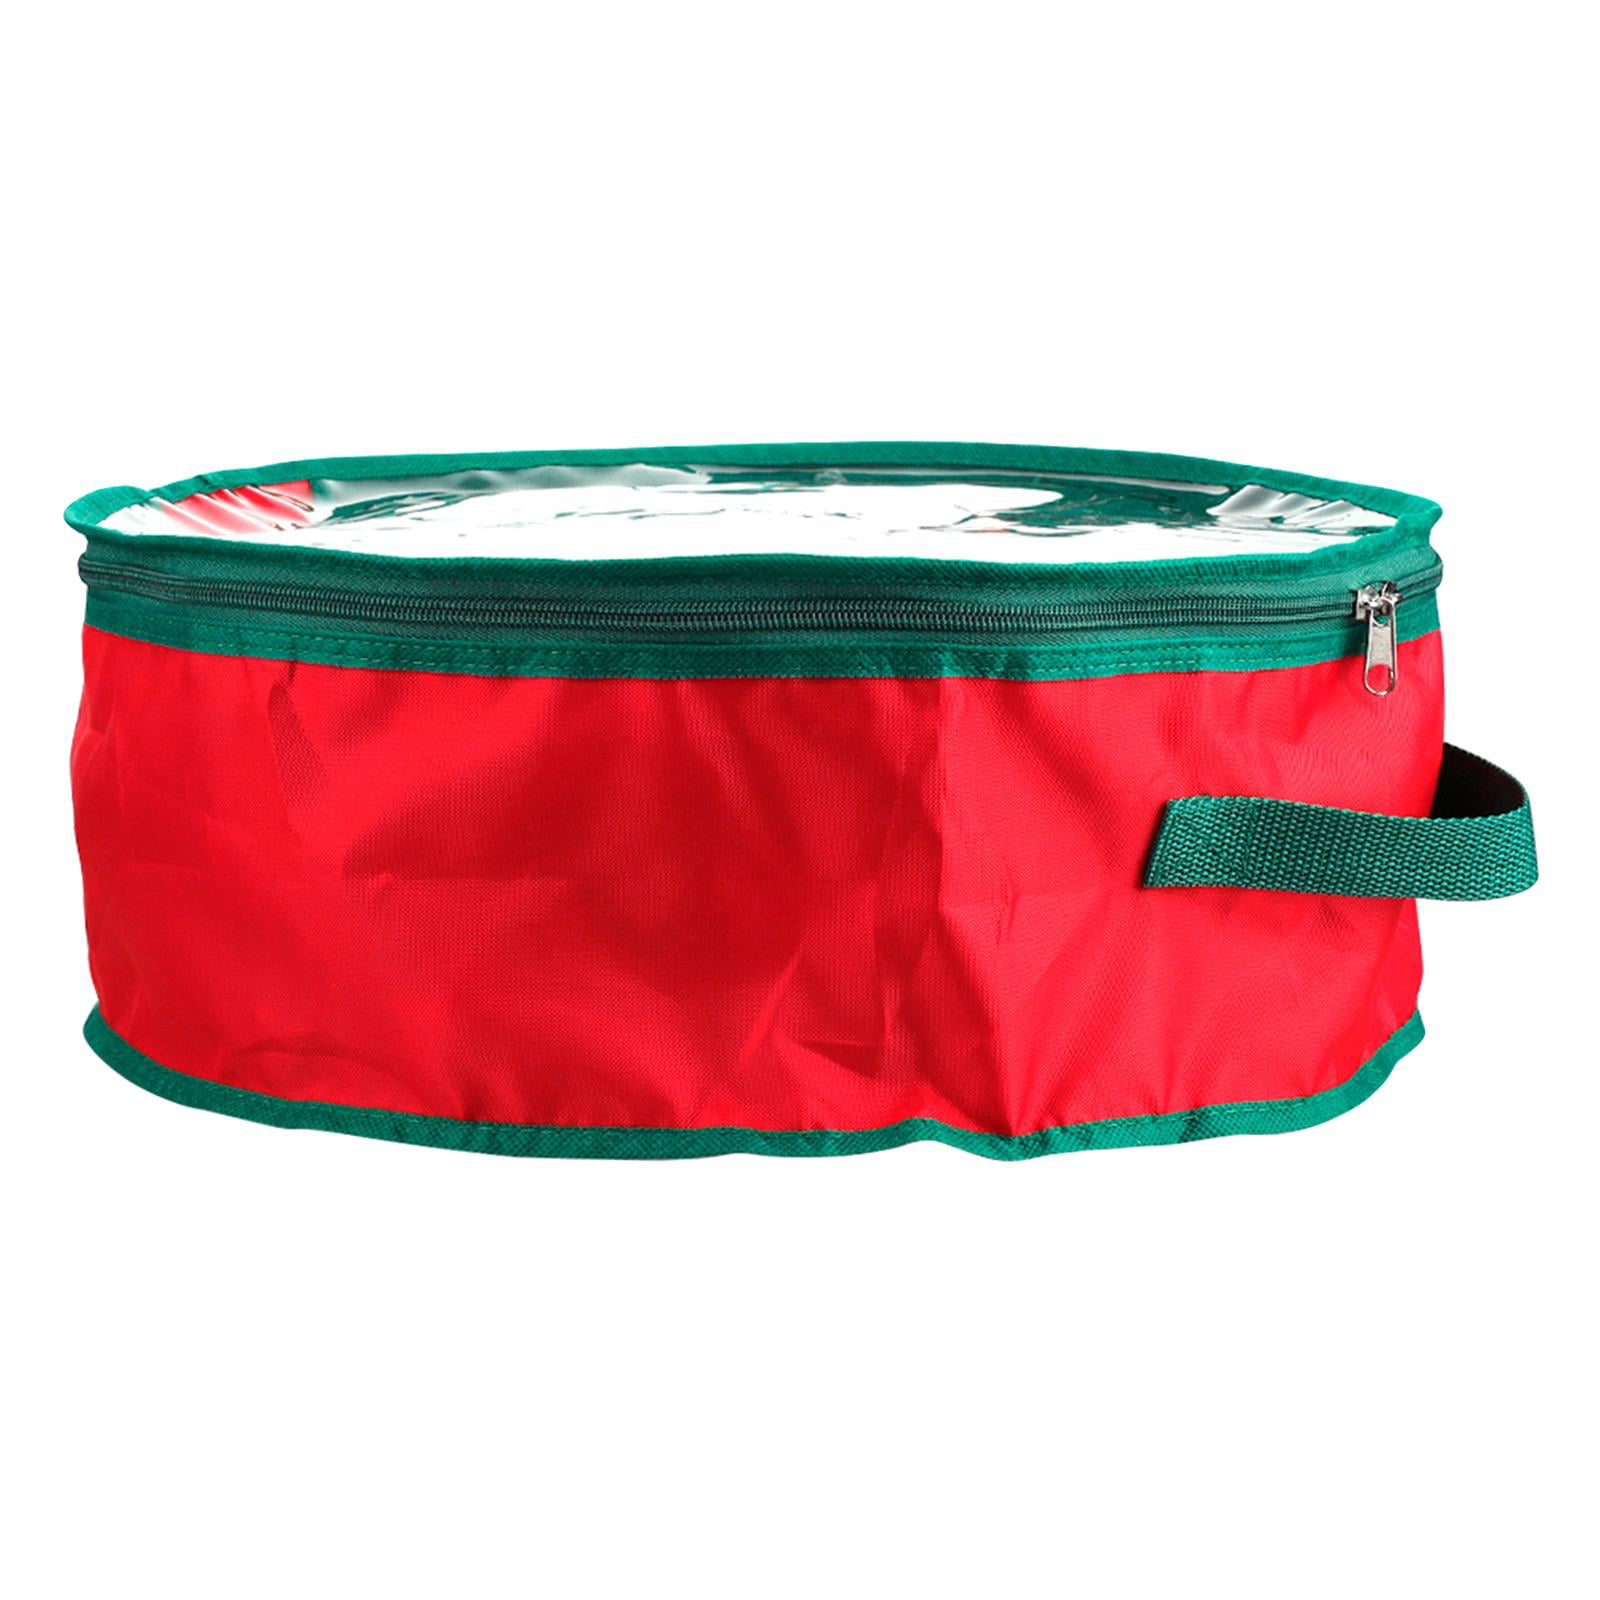 Details about   30" Green Wreath Clean up Christmas Xmas Wreath Storage Bag with Zipper & Handle 